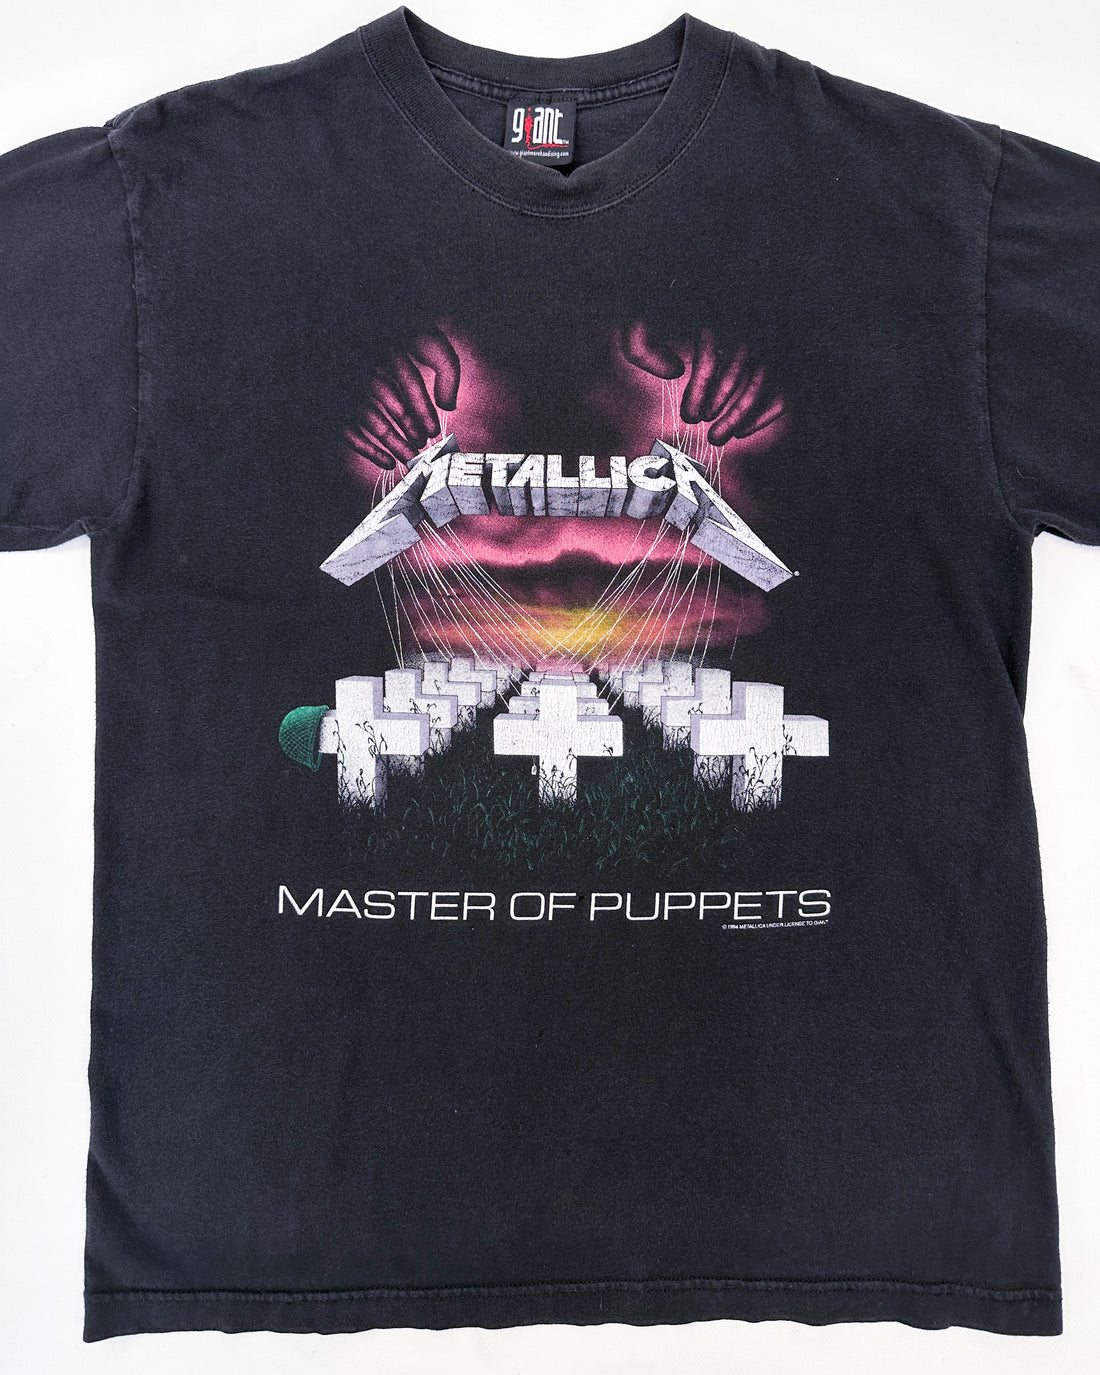 Metallica "Master of Puppets" By Giant Black Tee 1994